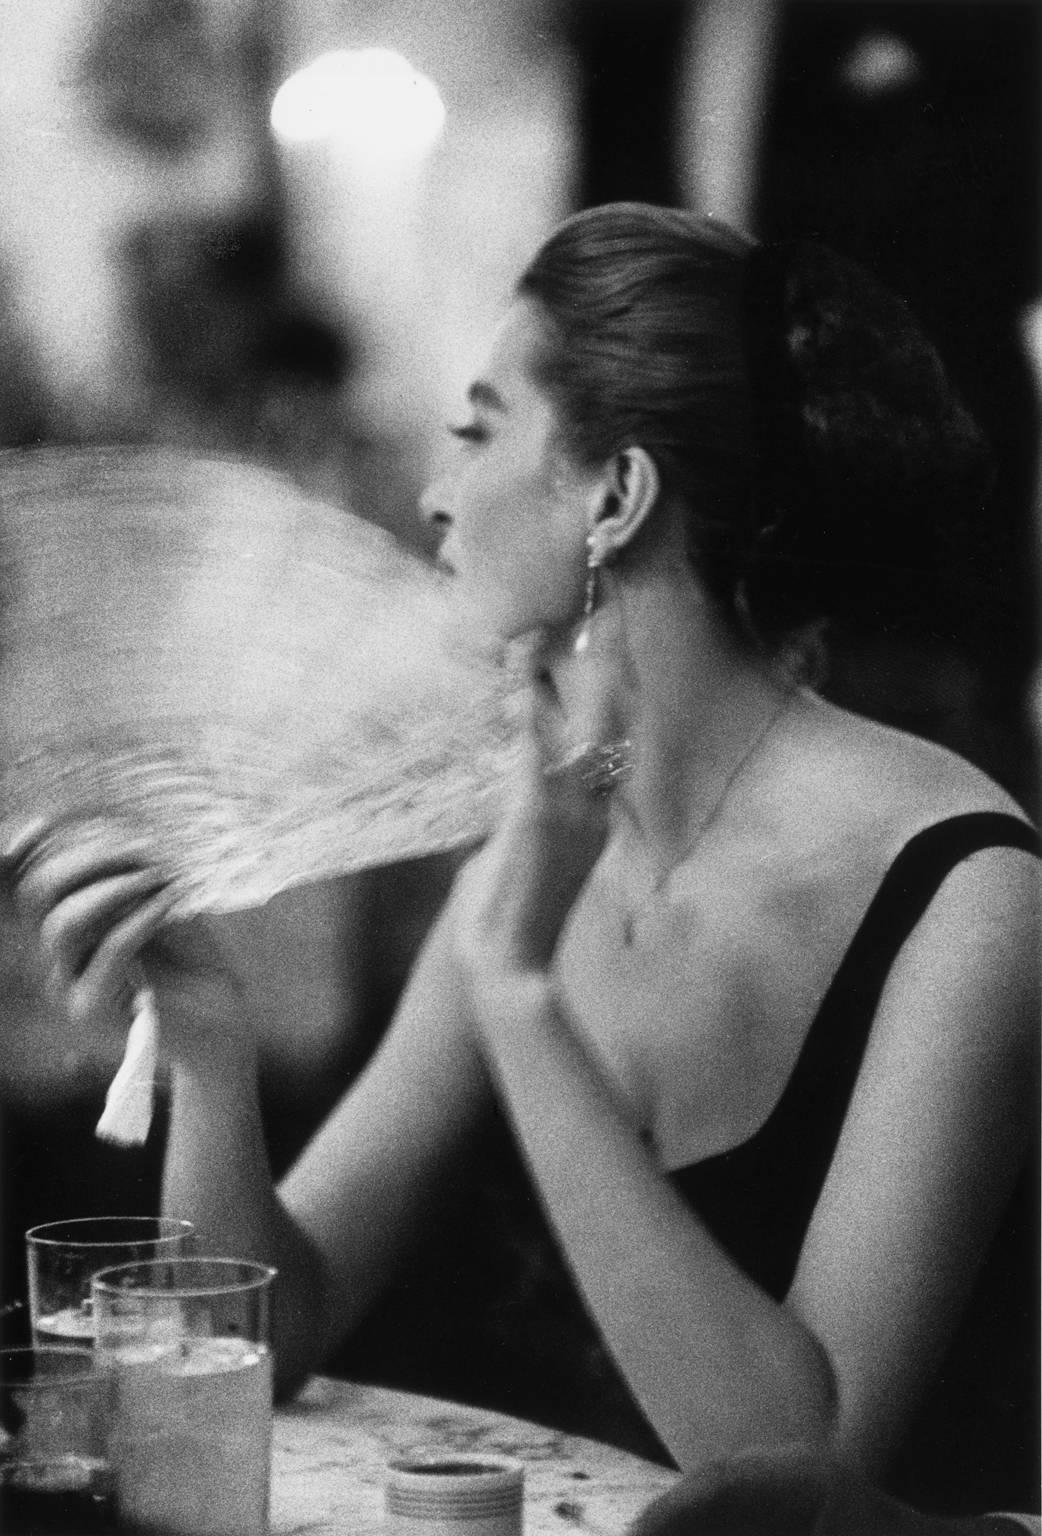 Slim Aarons Black and White Photograph - 'Capucine' Beverly Hills (Estate Stamped Edition)